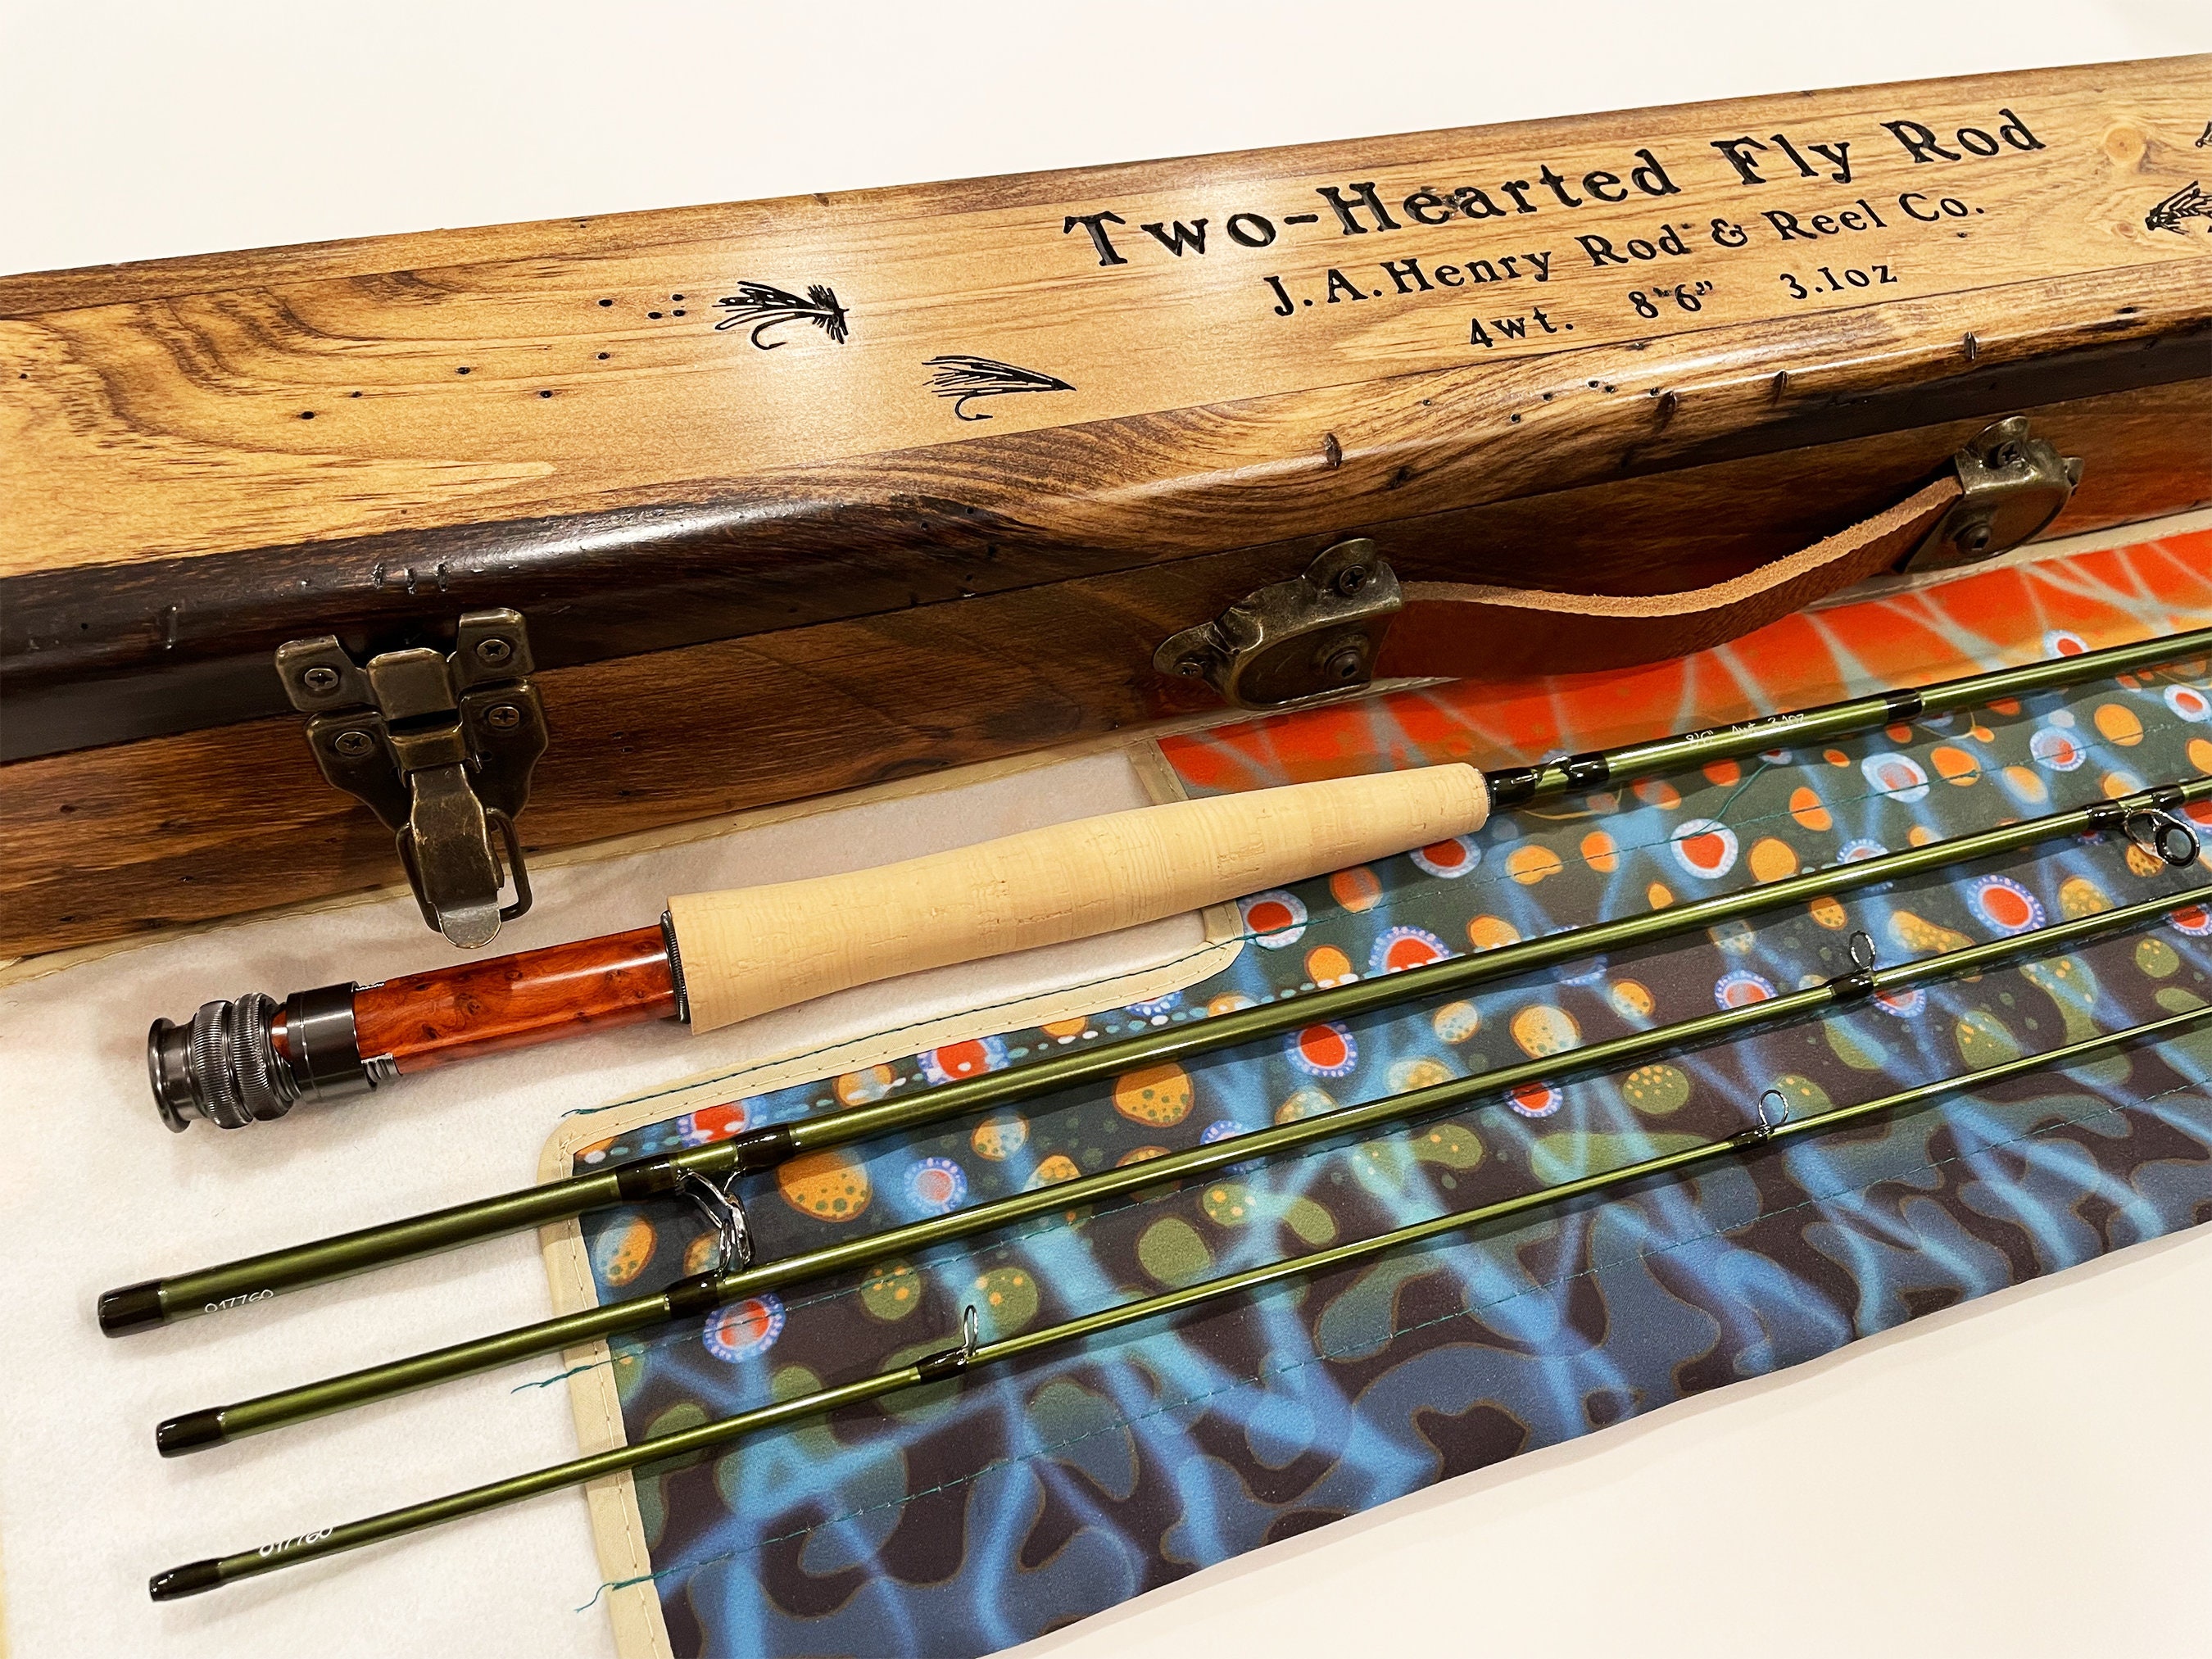 4wt. 8'6 Two-hearted Fly Rod by J.a.henry Rod Co. -  Australia